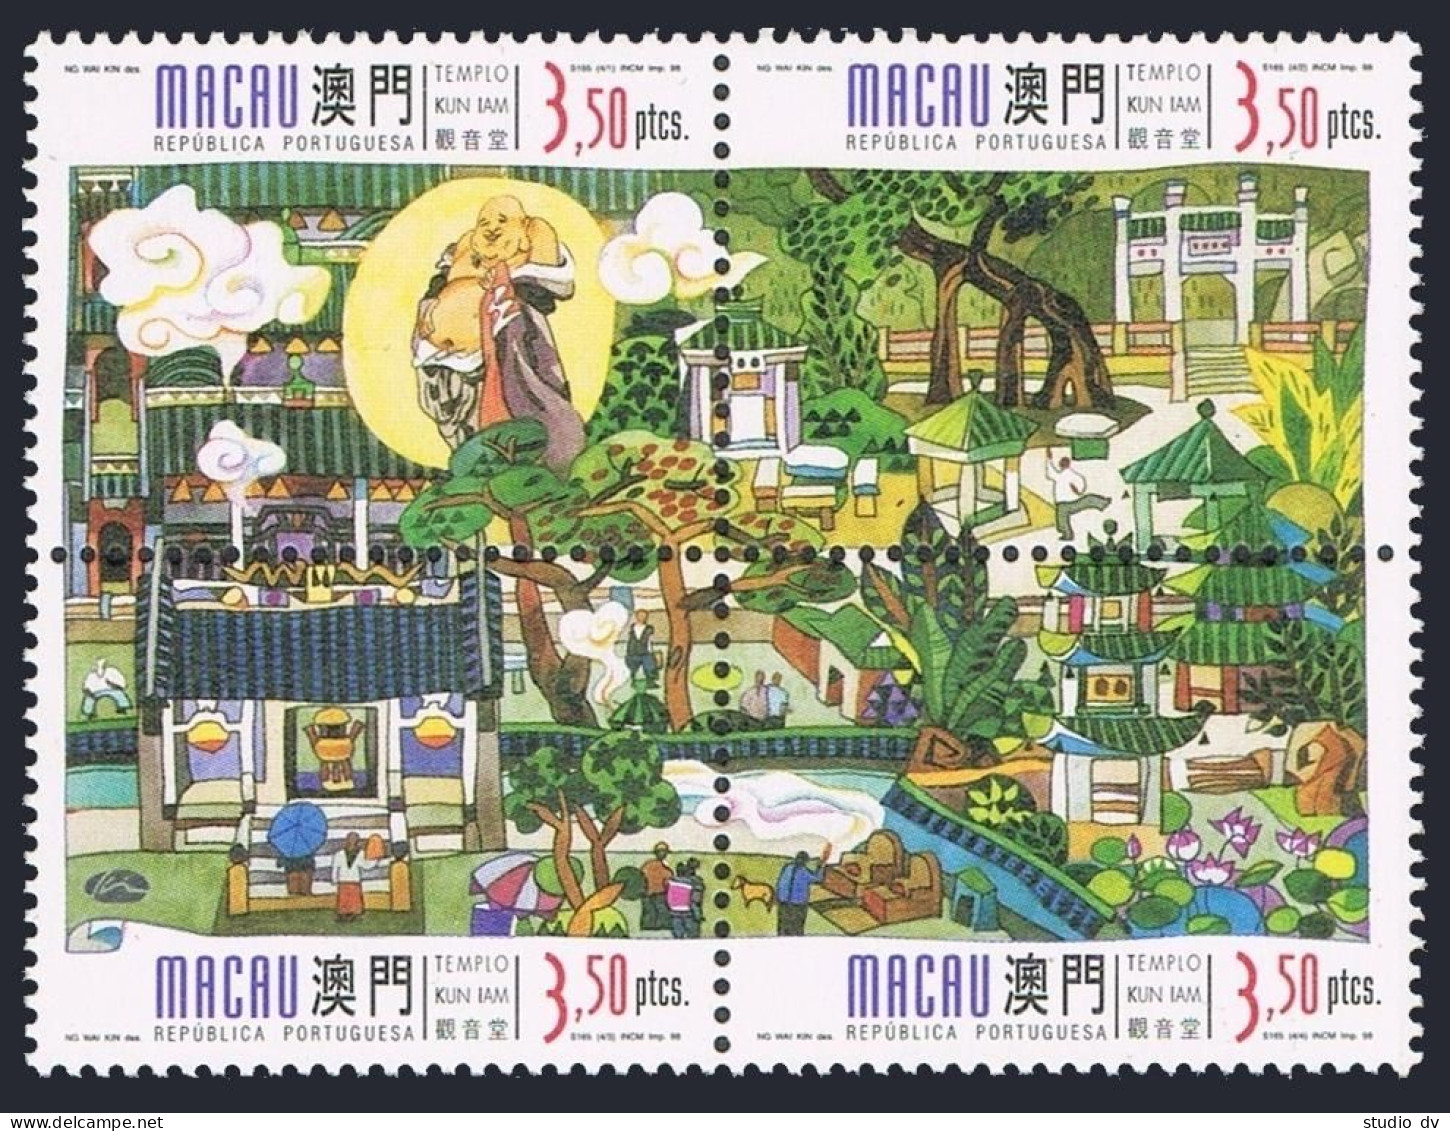 Macao 952-955a Block,956,956a Overprinted,MNH. Kun Iam Temple,1998.Table,Chairs, - Ungebraucht